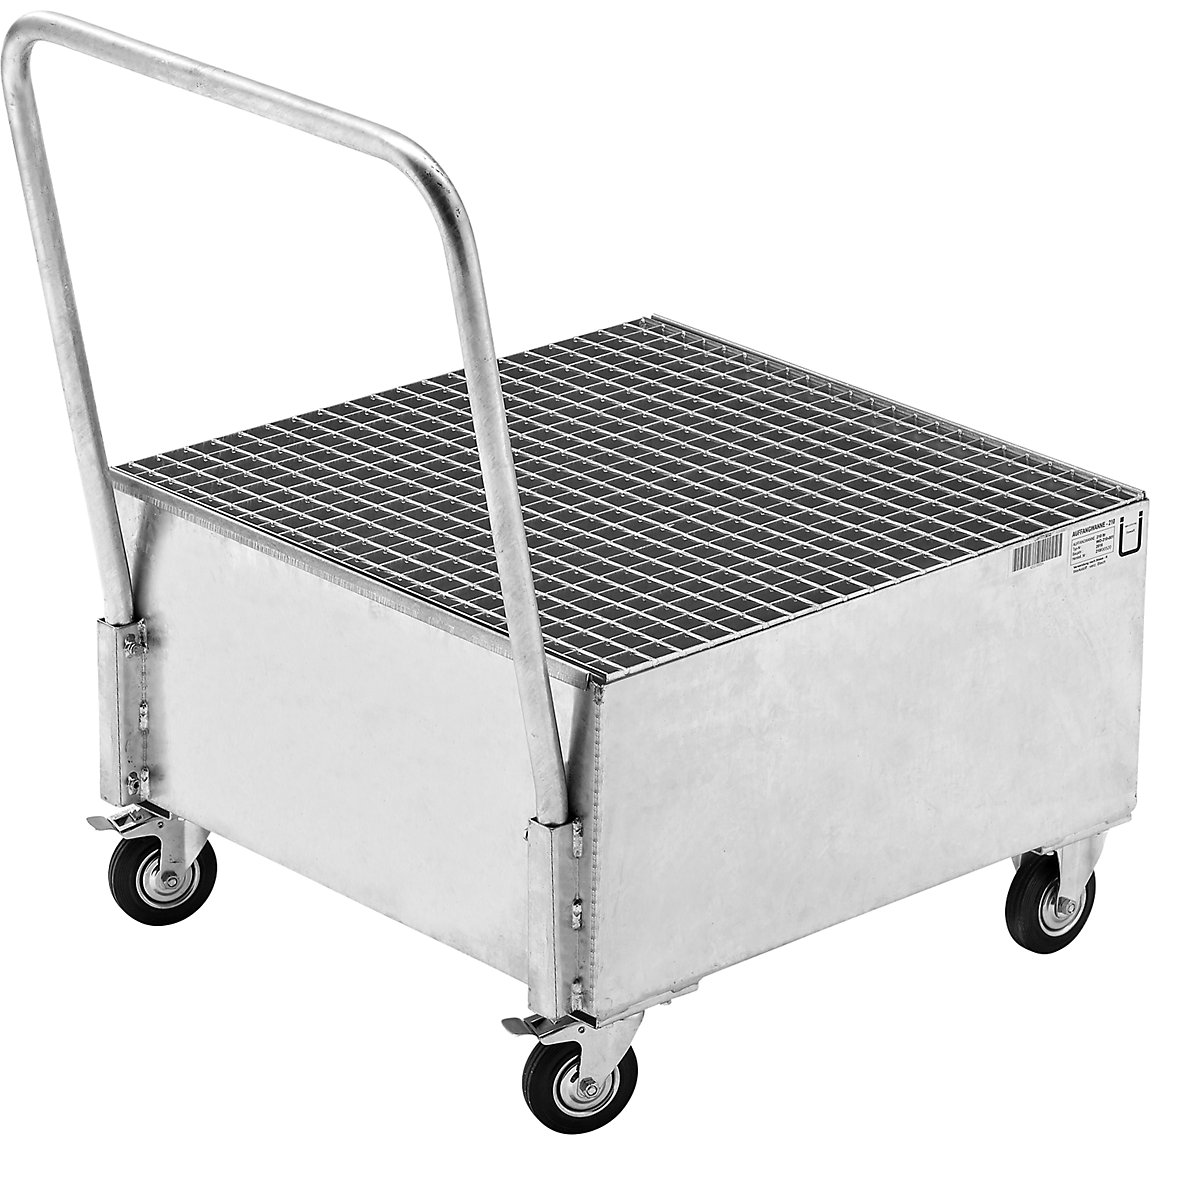 Mobile sump tray made of sheet steel – eurokraft basic, LxW 800 x 800 mm, 1 x 200 l vertical drum, hot dip galvanised-4